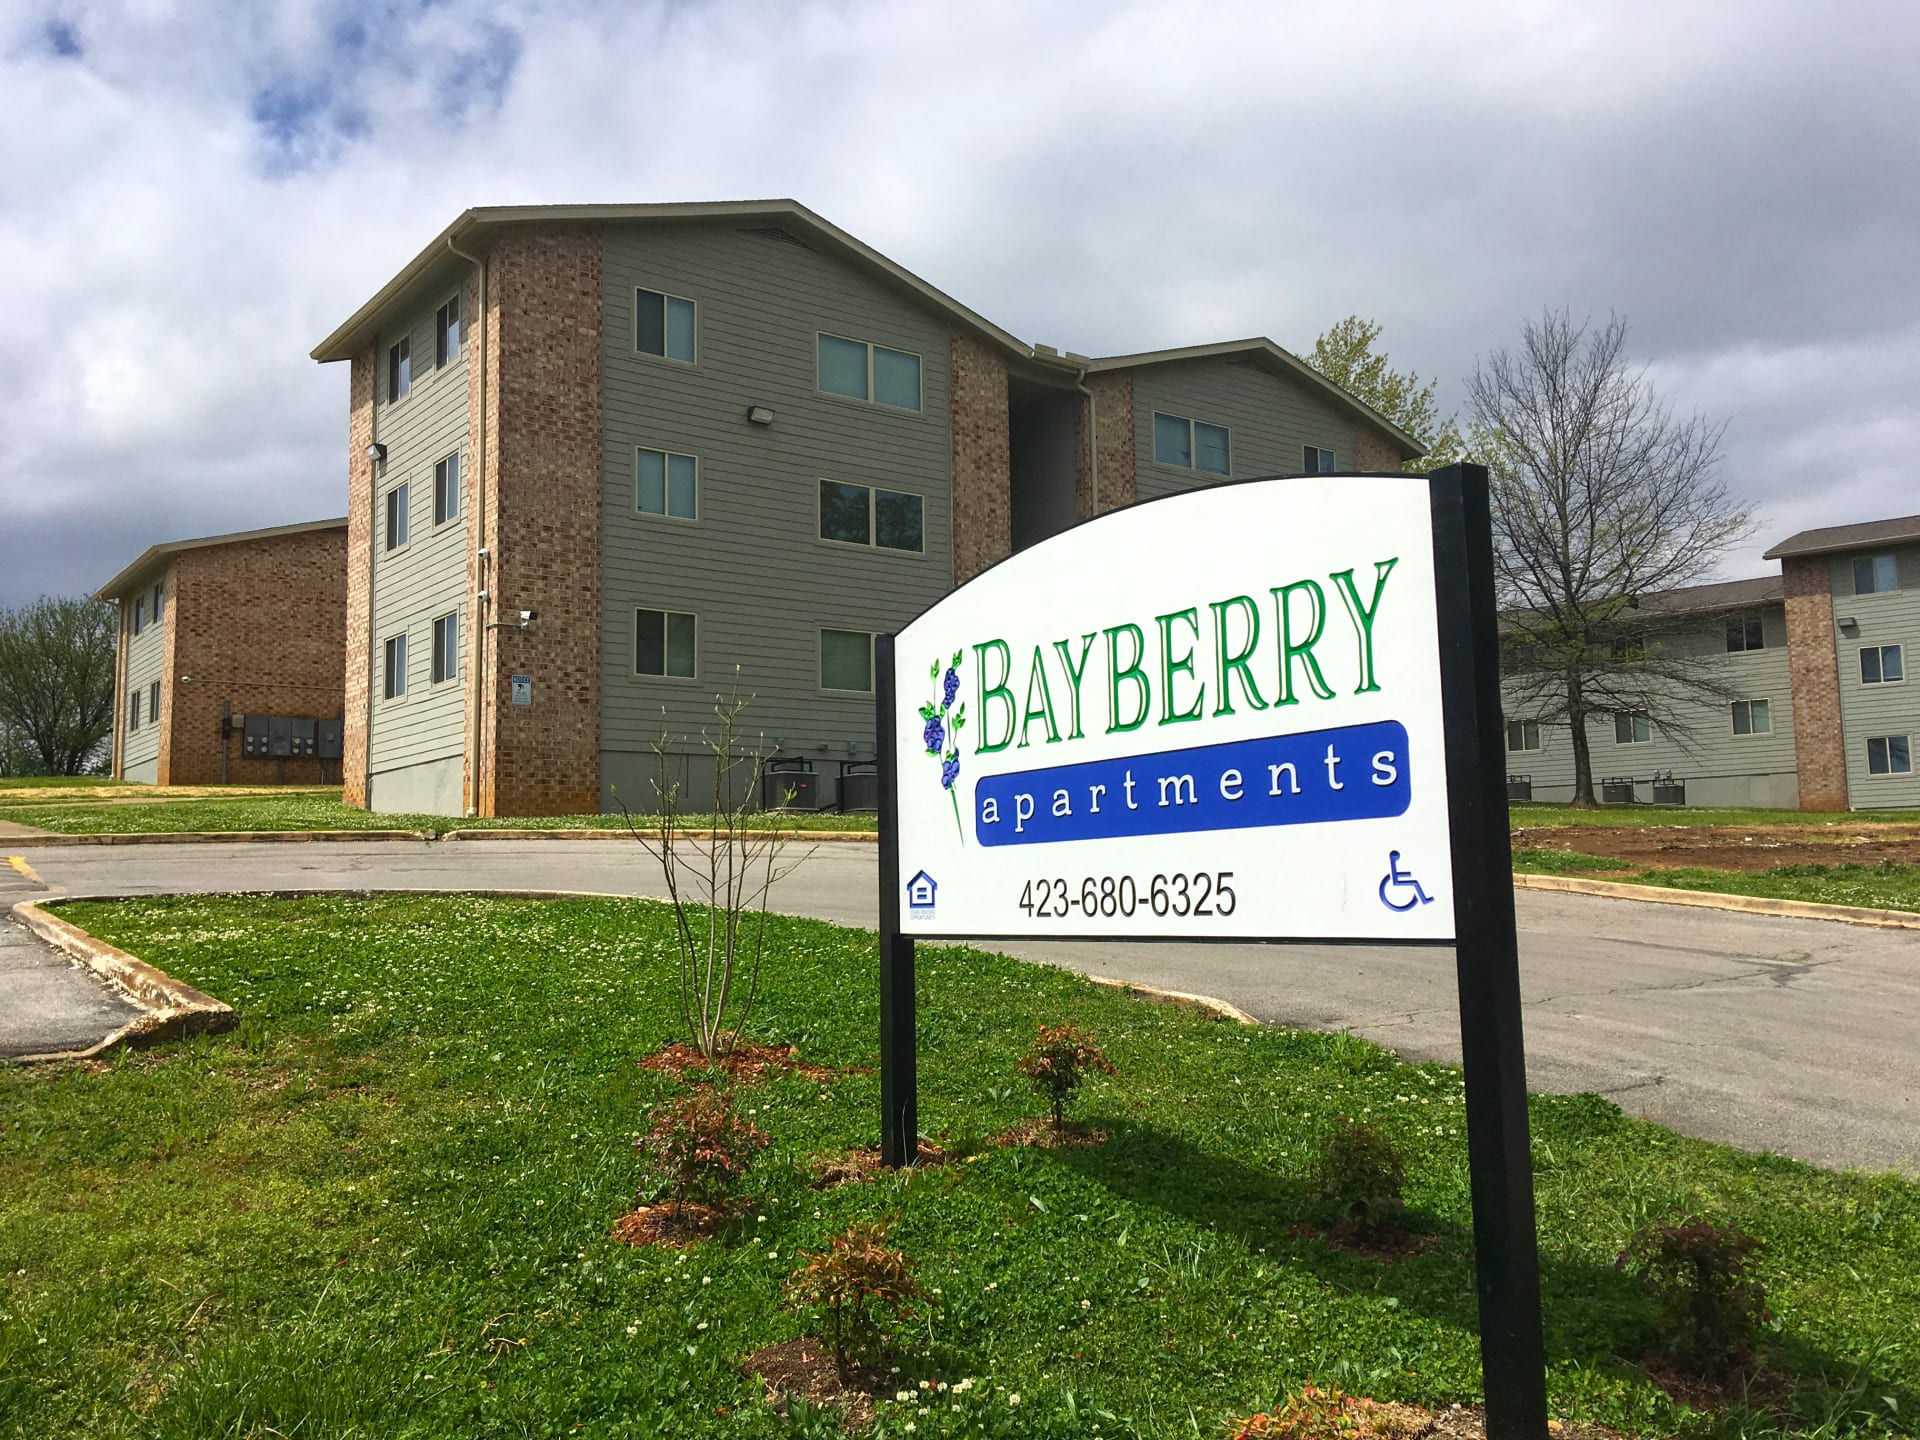 Bayberry Apartments Affordable Housing Community 